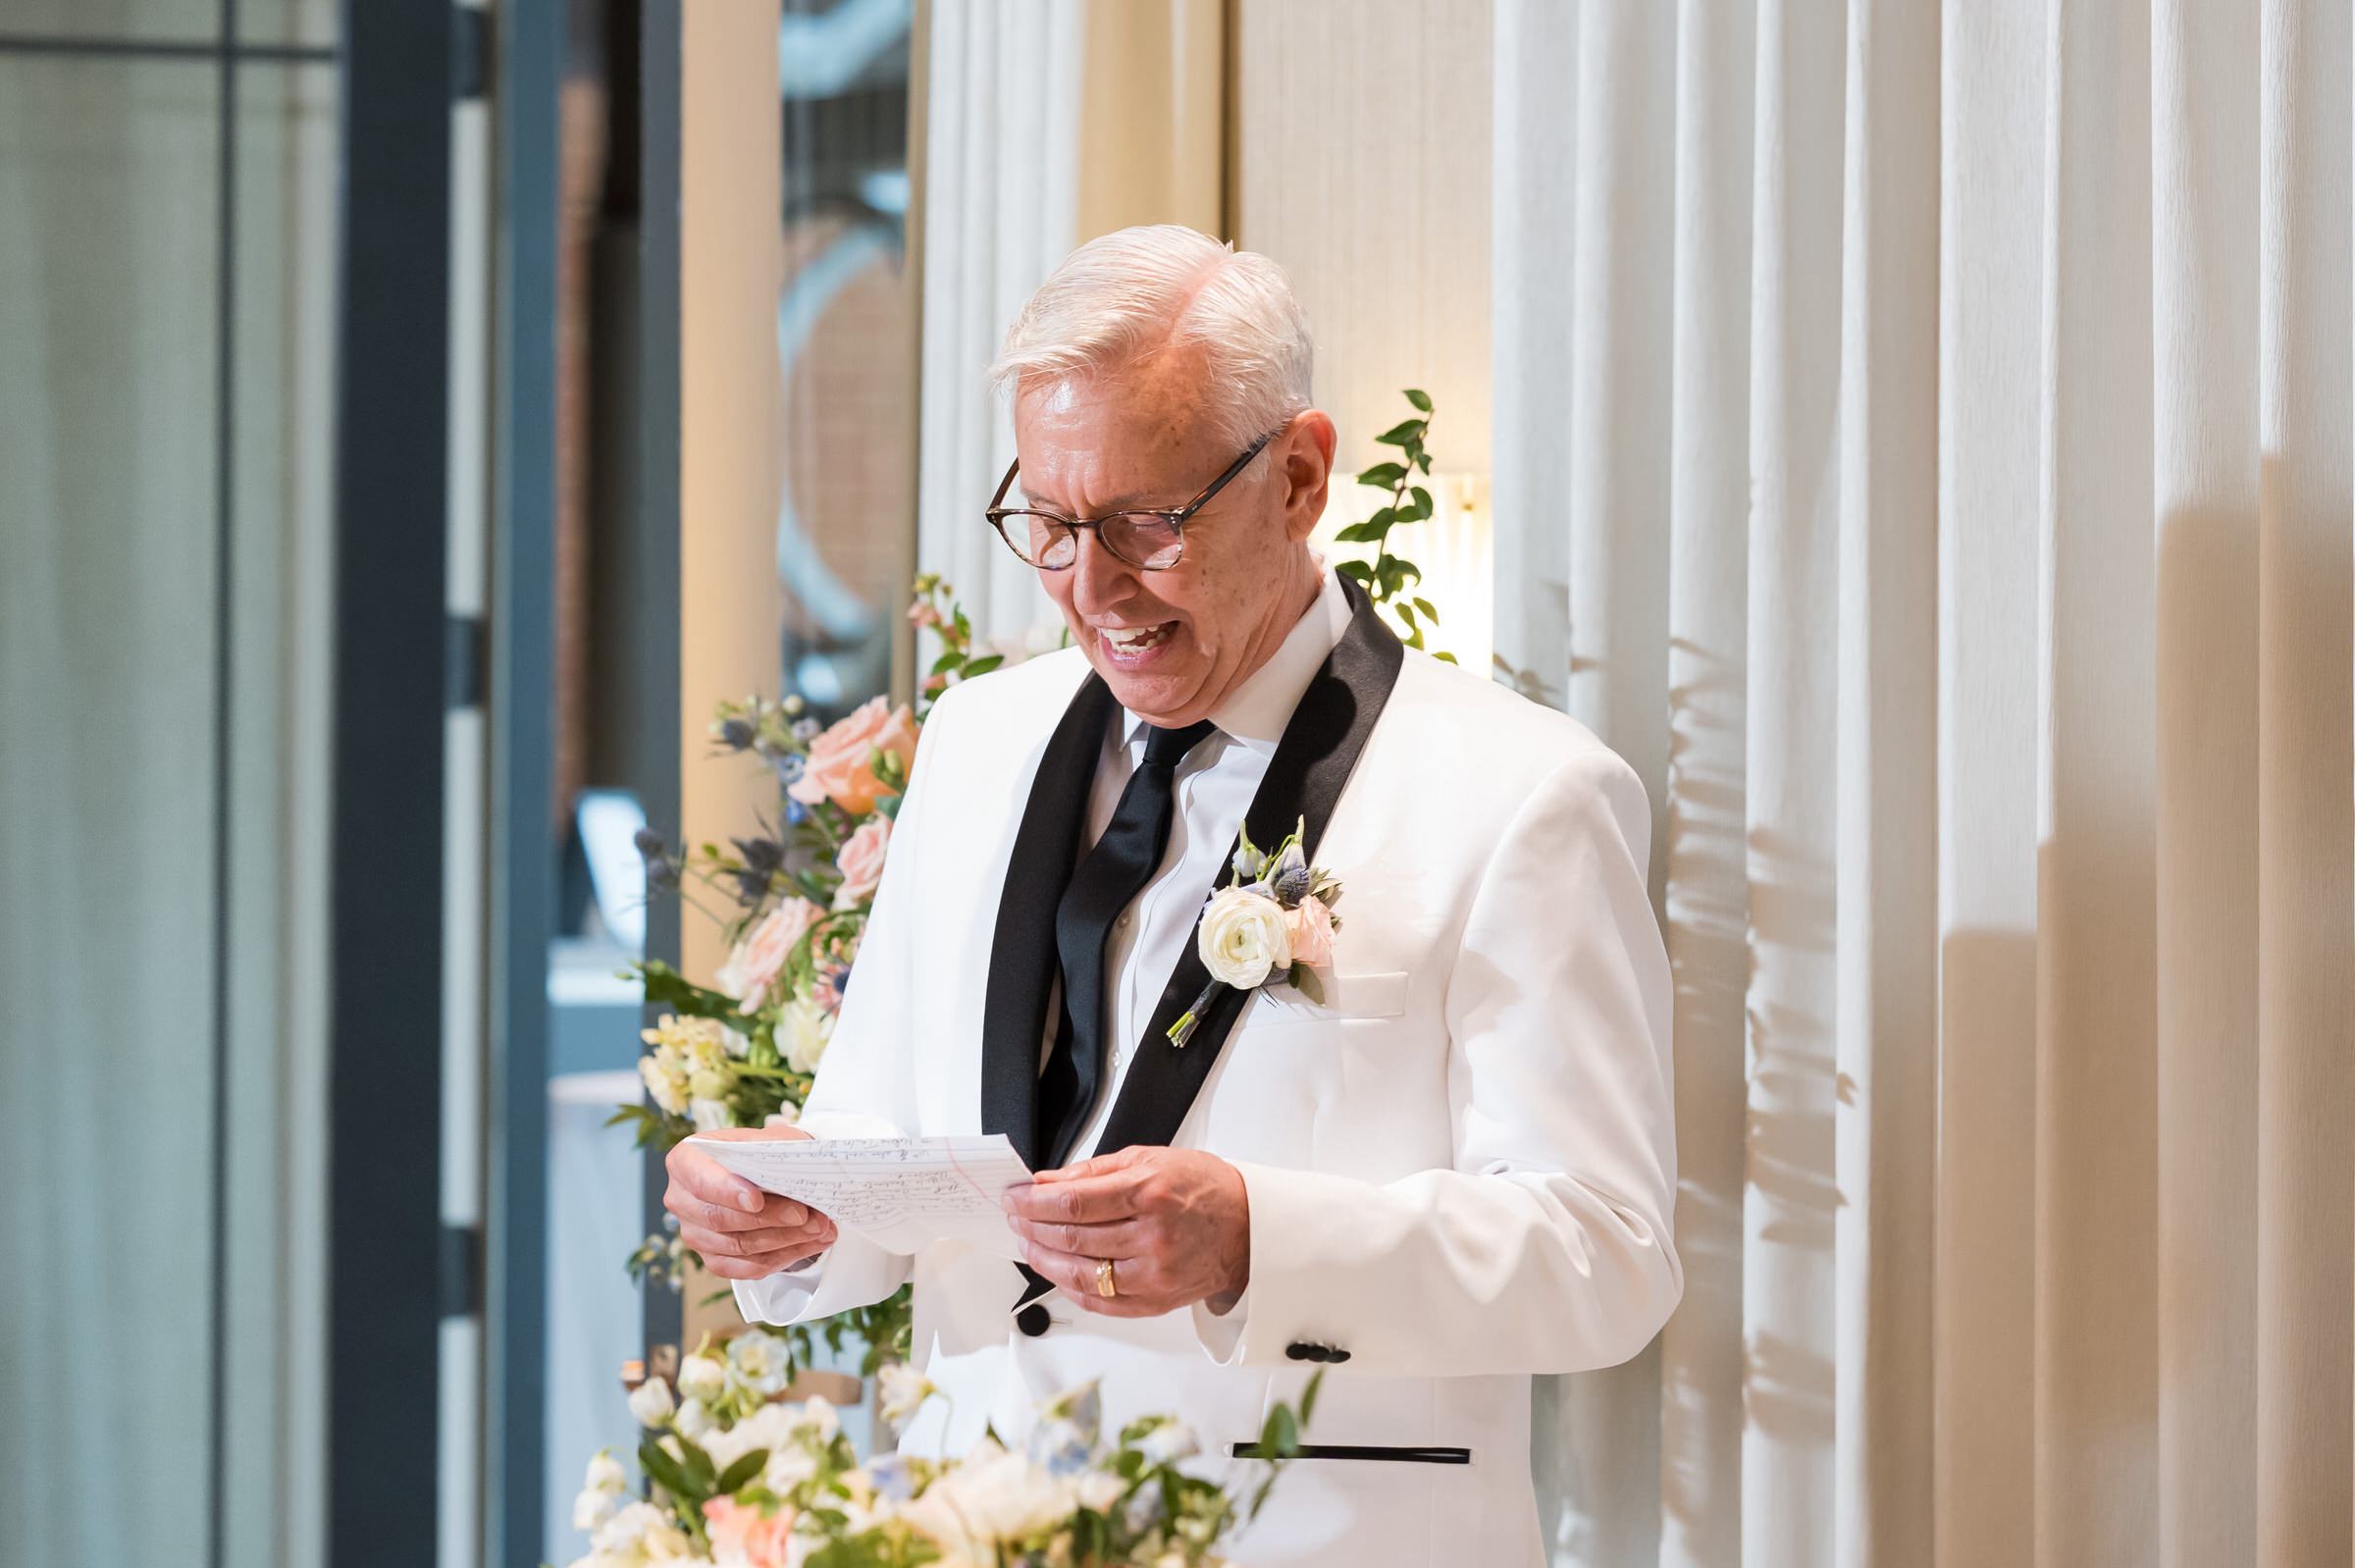 A groom reads a speech at his private wedding at St. John's Resort.